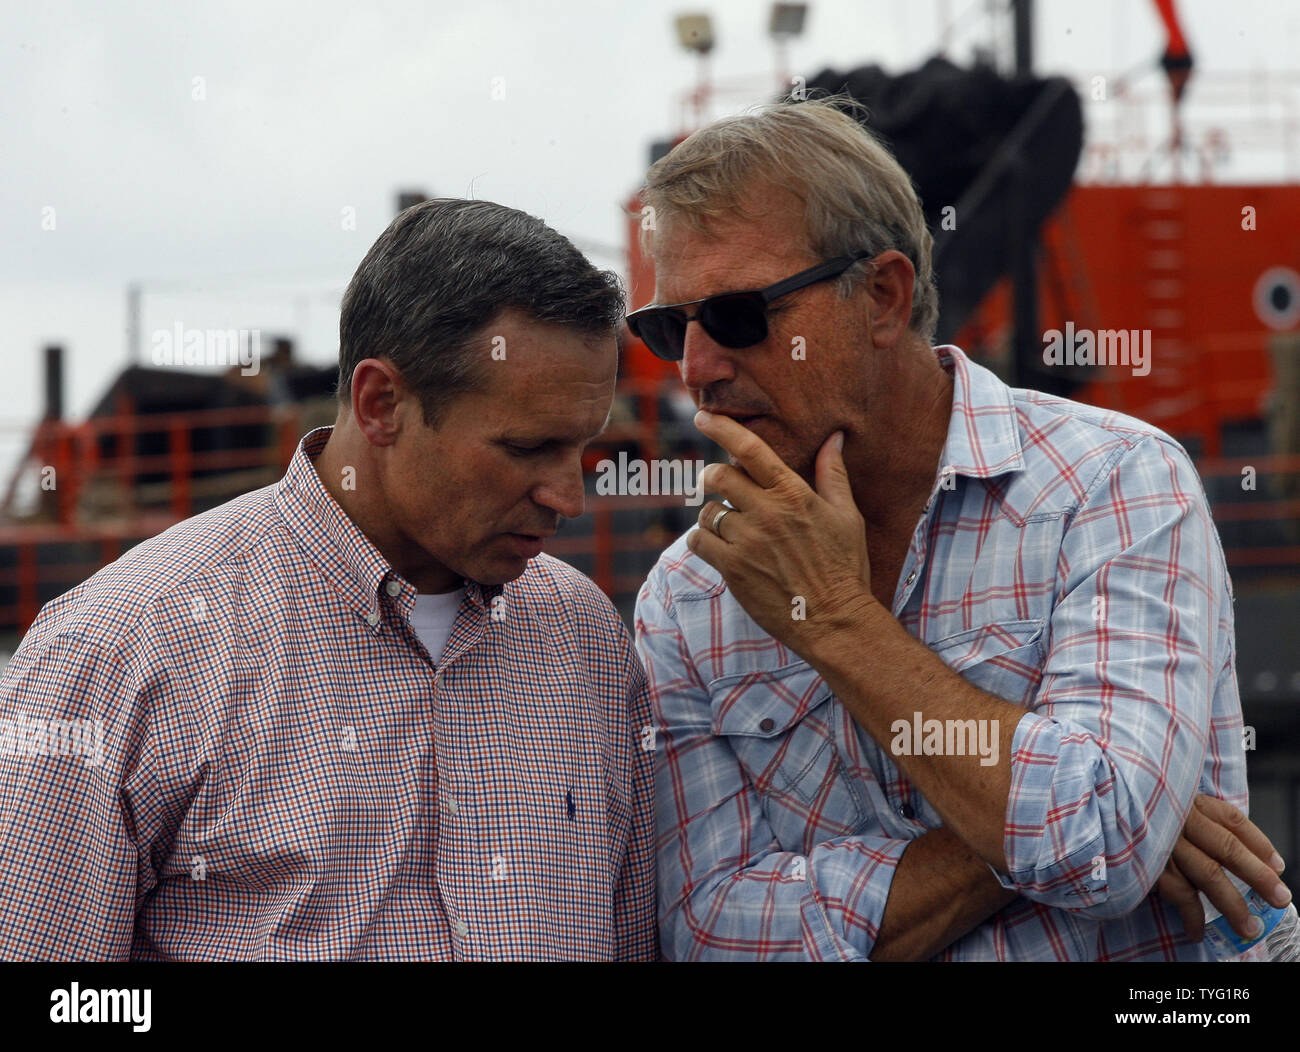 Kevin Costner, right, actor and founding partner of Ocean Therapy, talks with Doug Suttles,  chief operating officer of BP Exploration and Production, before a press conference in Port Fourchon, Louisiana, June 18, 2010. BP has purchased a centrifuge from Ocean Therapy that separates oil and water.   UPI/A.J. Sisco.. Stock Photo